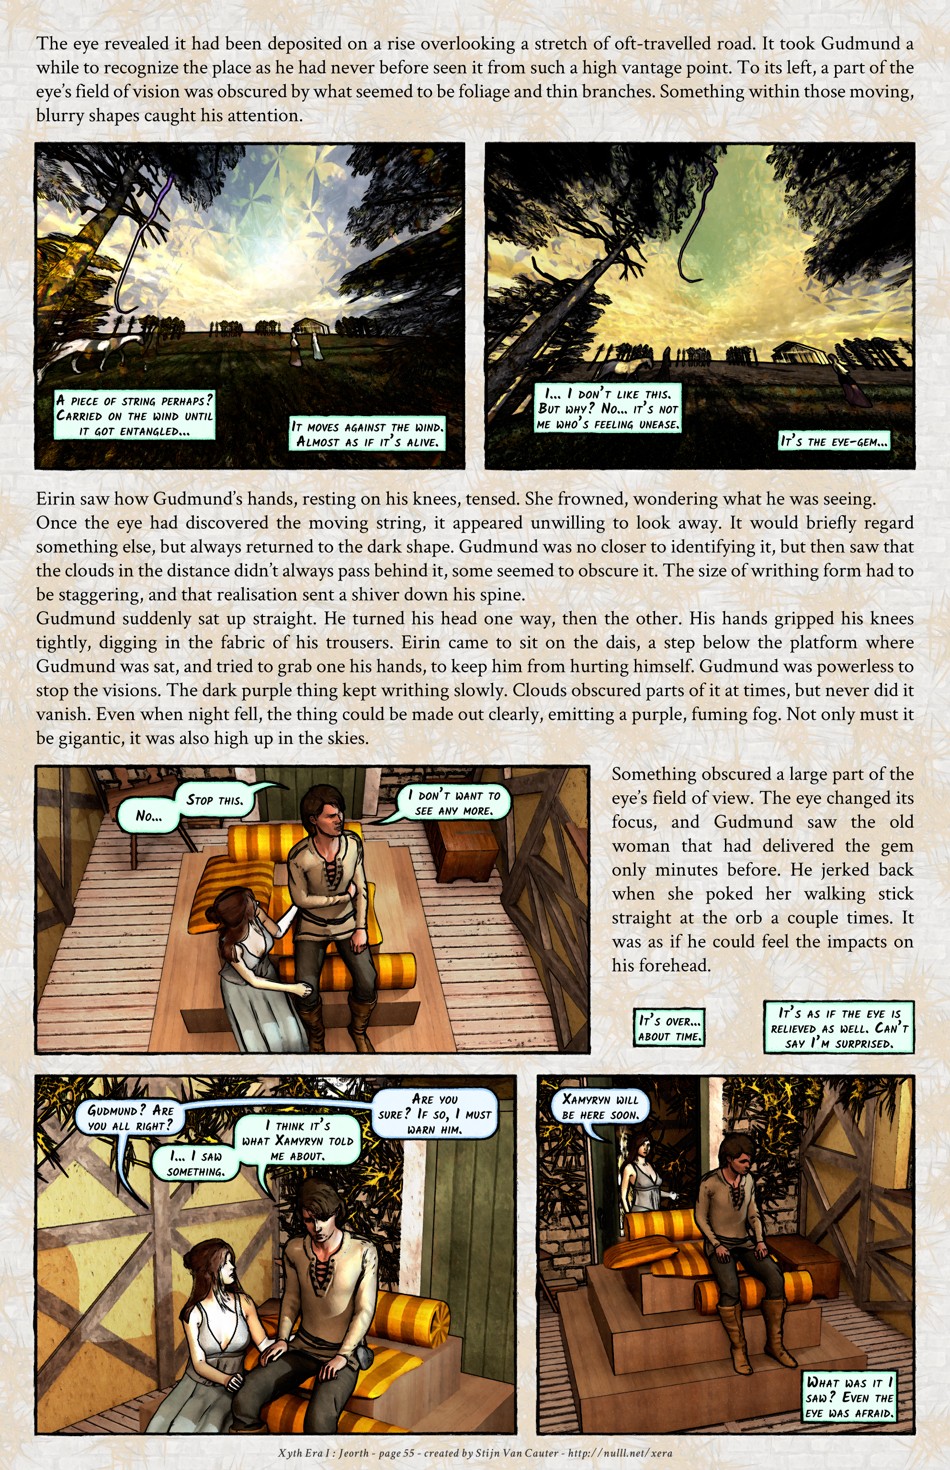 page 6/6